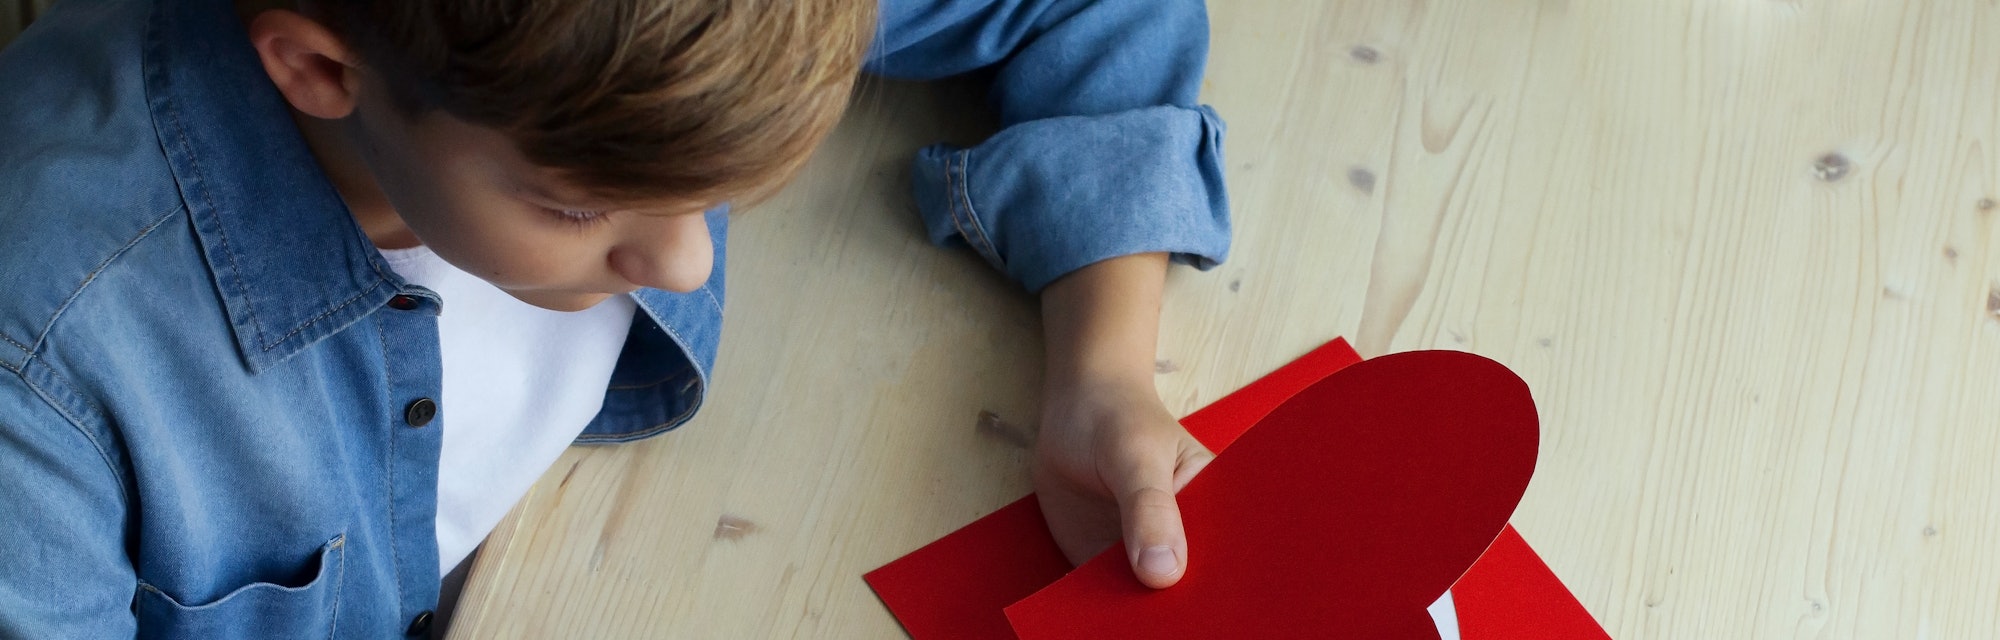 boy cutting out heart for Valentine's Day 